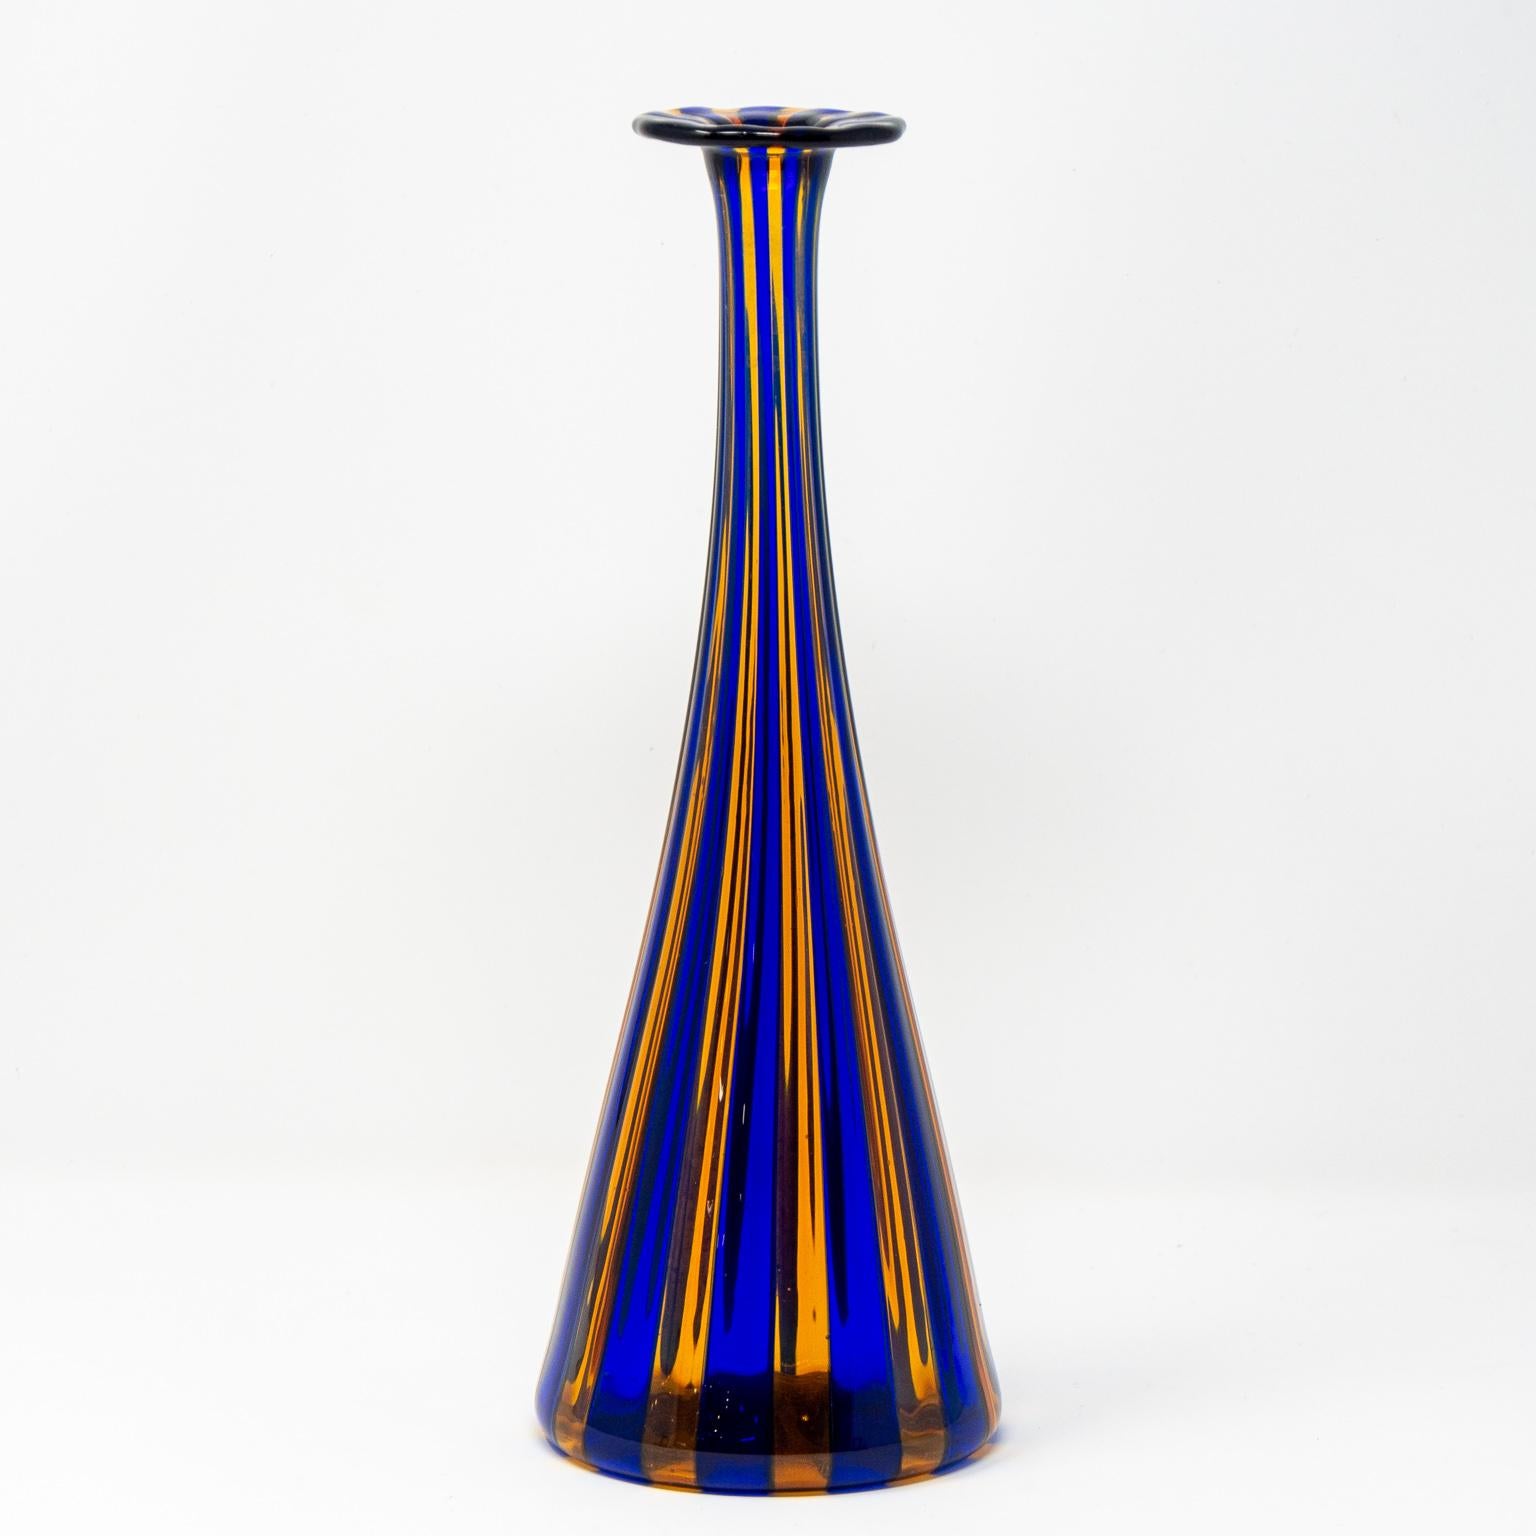 Murano glass vase is just under 11” tall and features vivid blue and orange vertical stripes, circa 1970s. No signature or maker’s mark. Another smaller version of this vase acquired at the same time from the same sources retains the original Murano